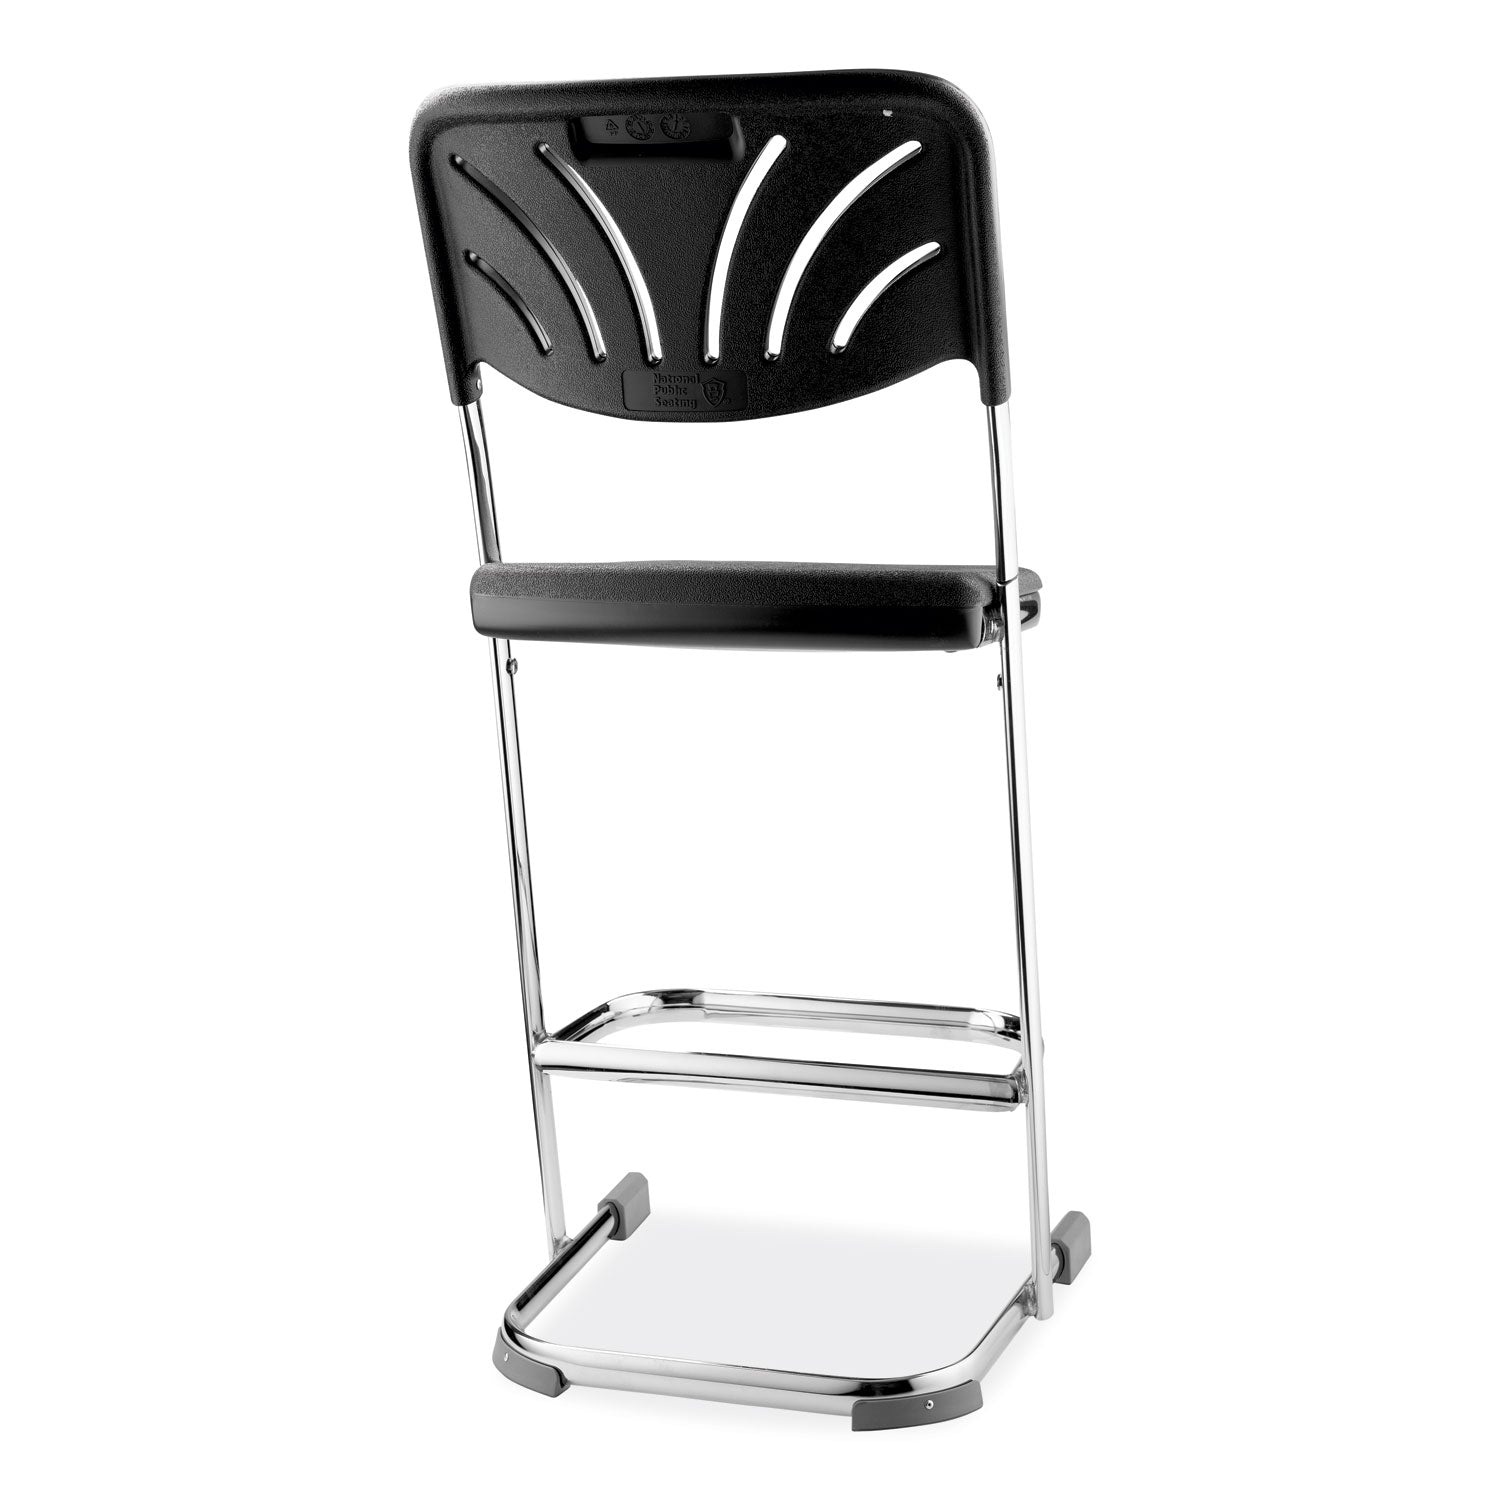 6600-series-elephant-z-stool-with-backrest-supports-500-lb-24-seat-ht-black-seat-back-chrome-frameships-in-1-3-bus-days_nps6624b - 2